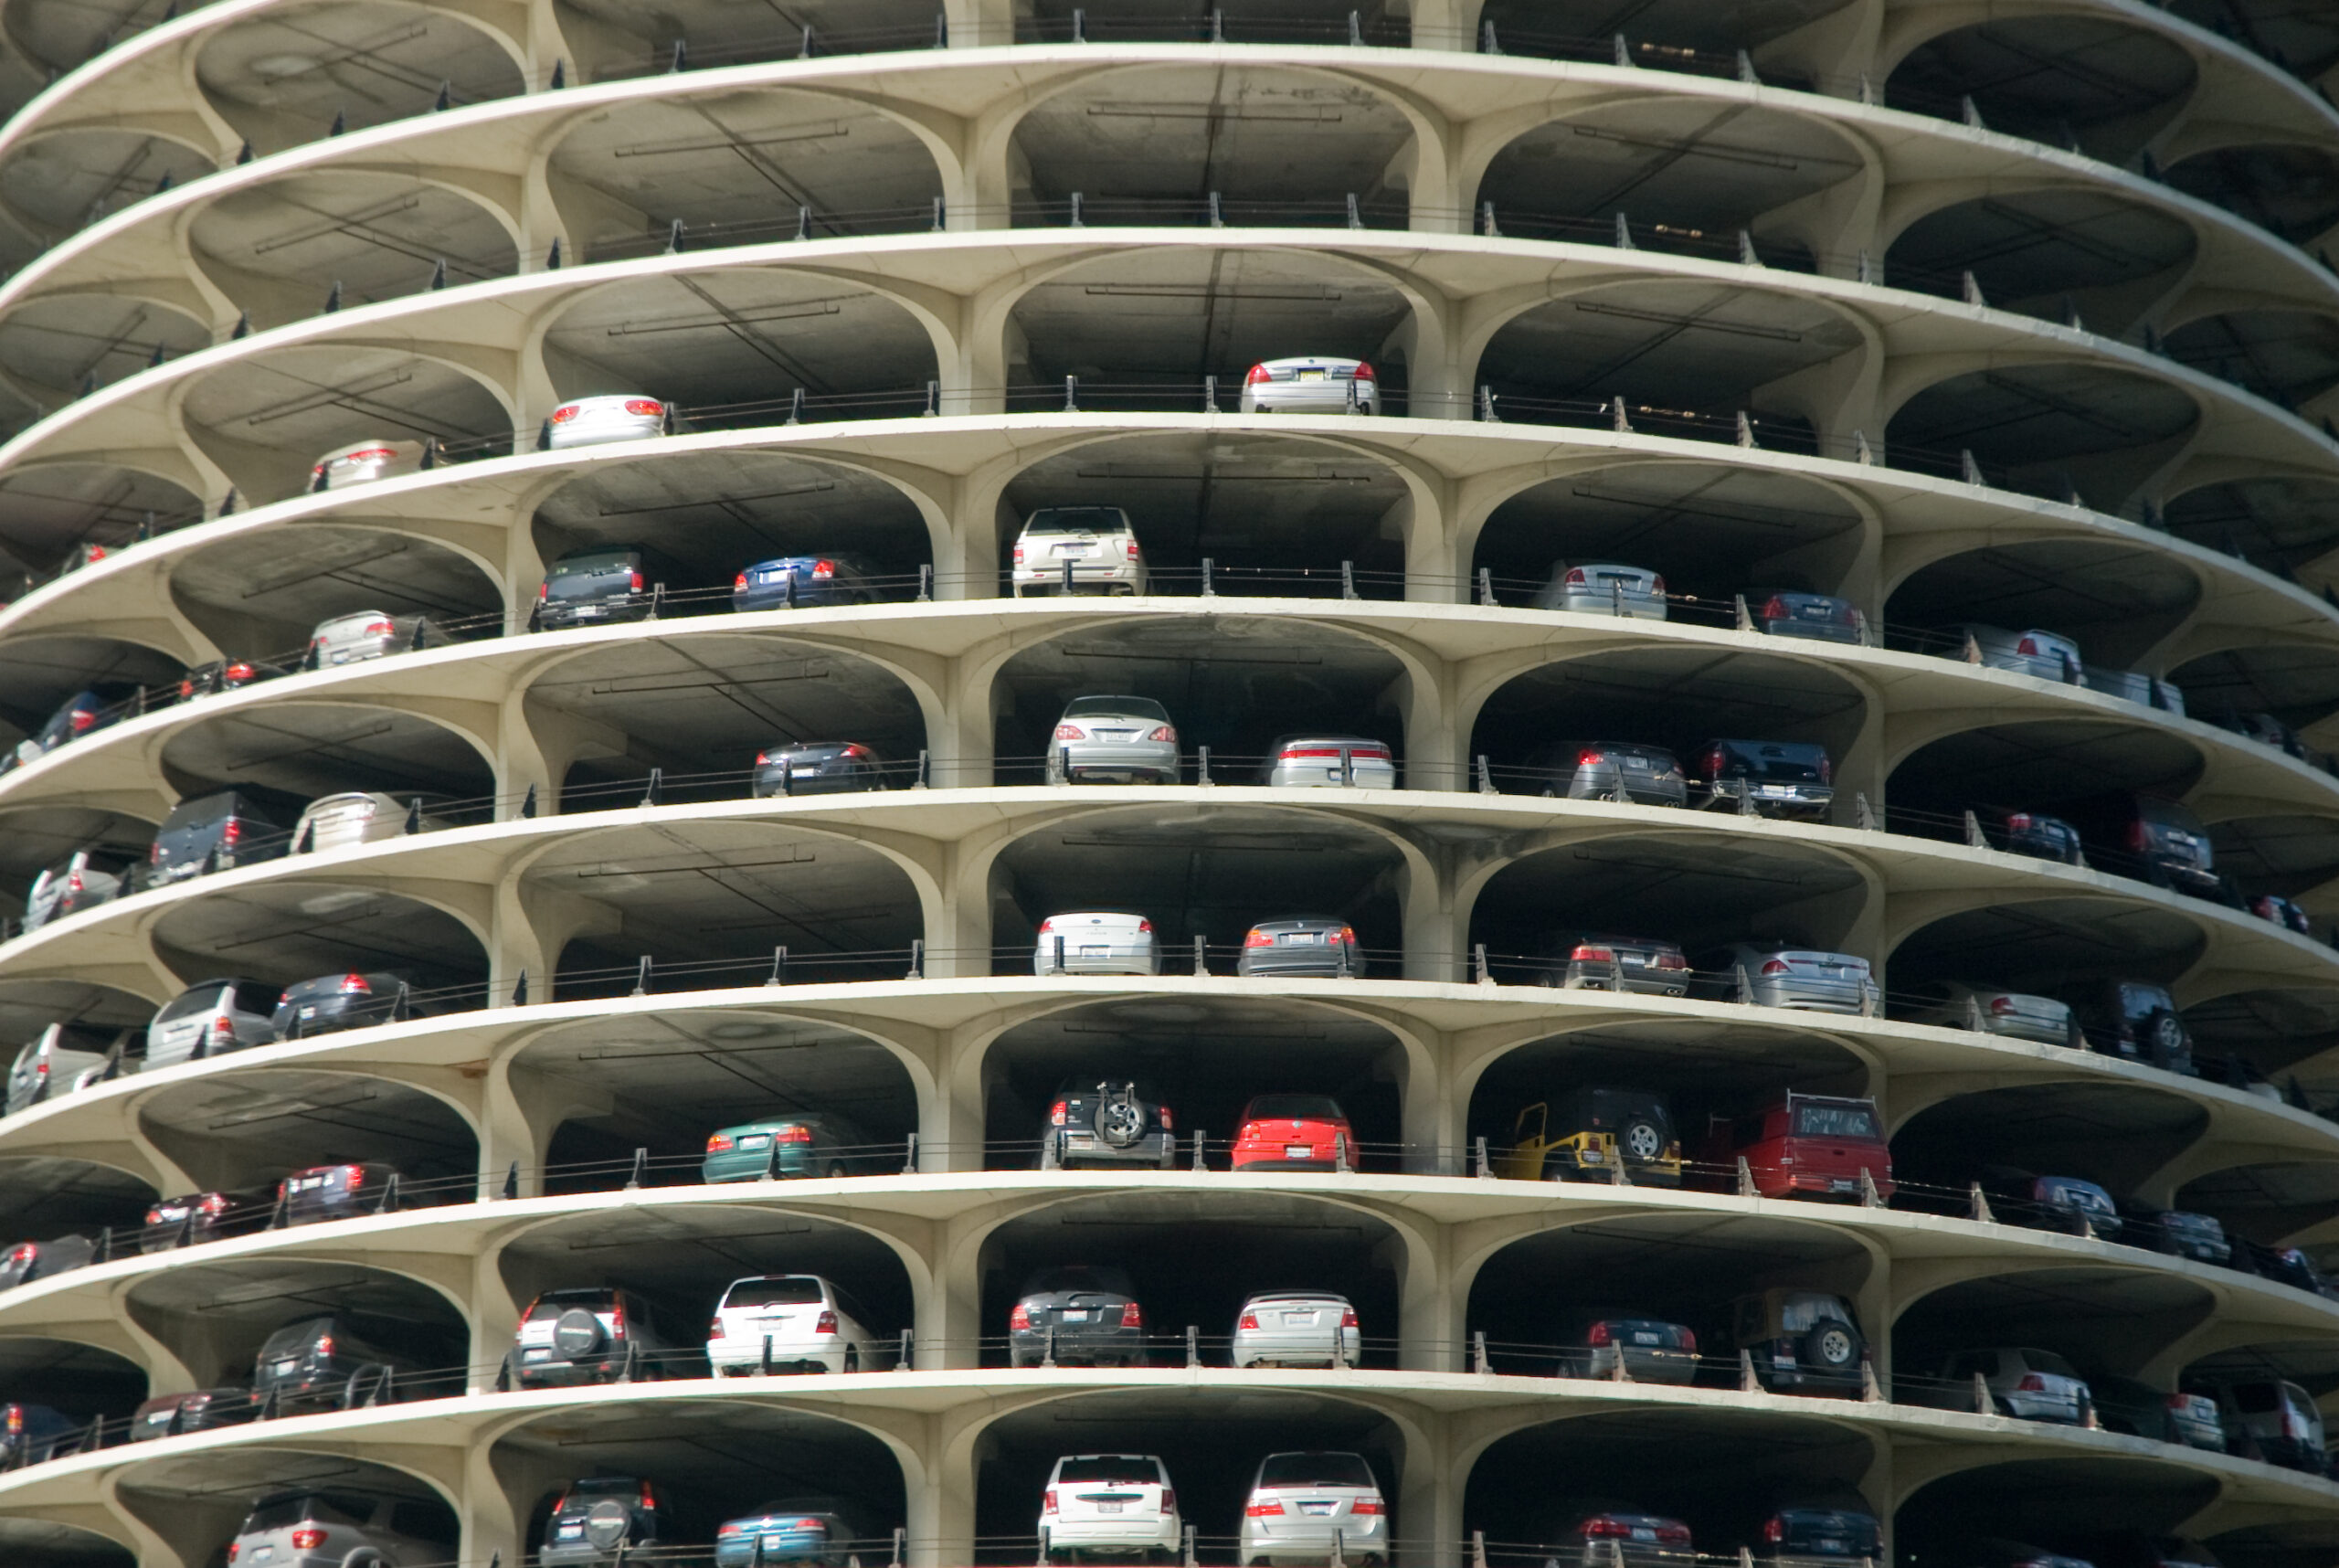 Marina City Tower Parking Deck Levels in Chicago, Illinois